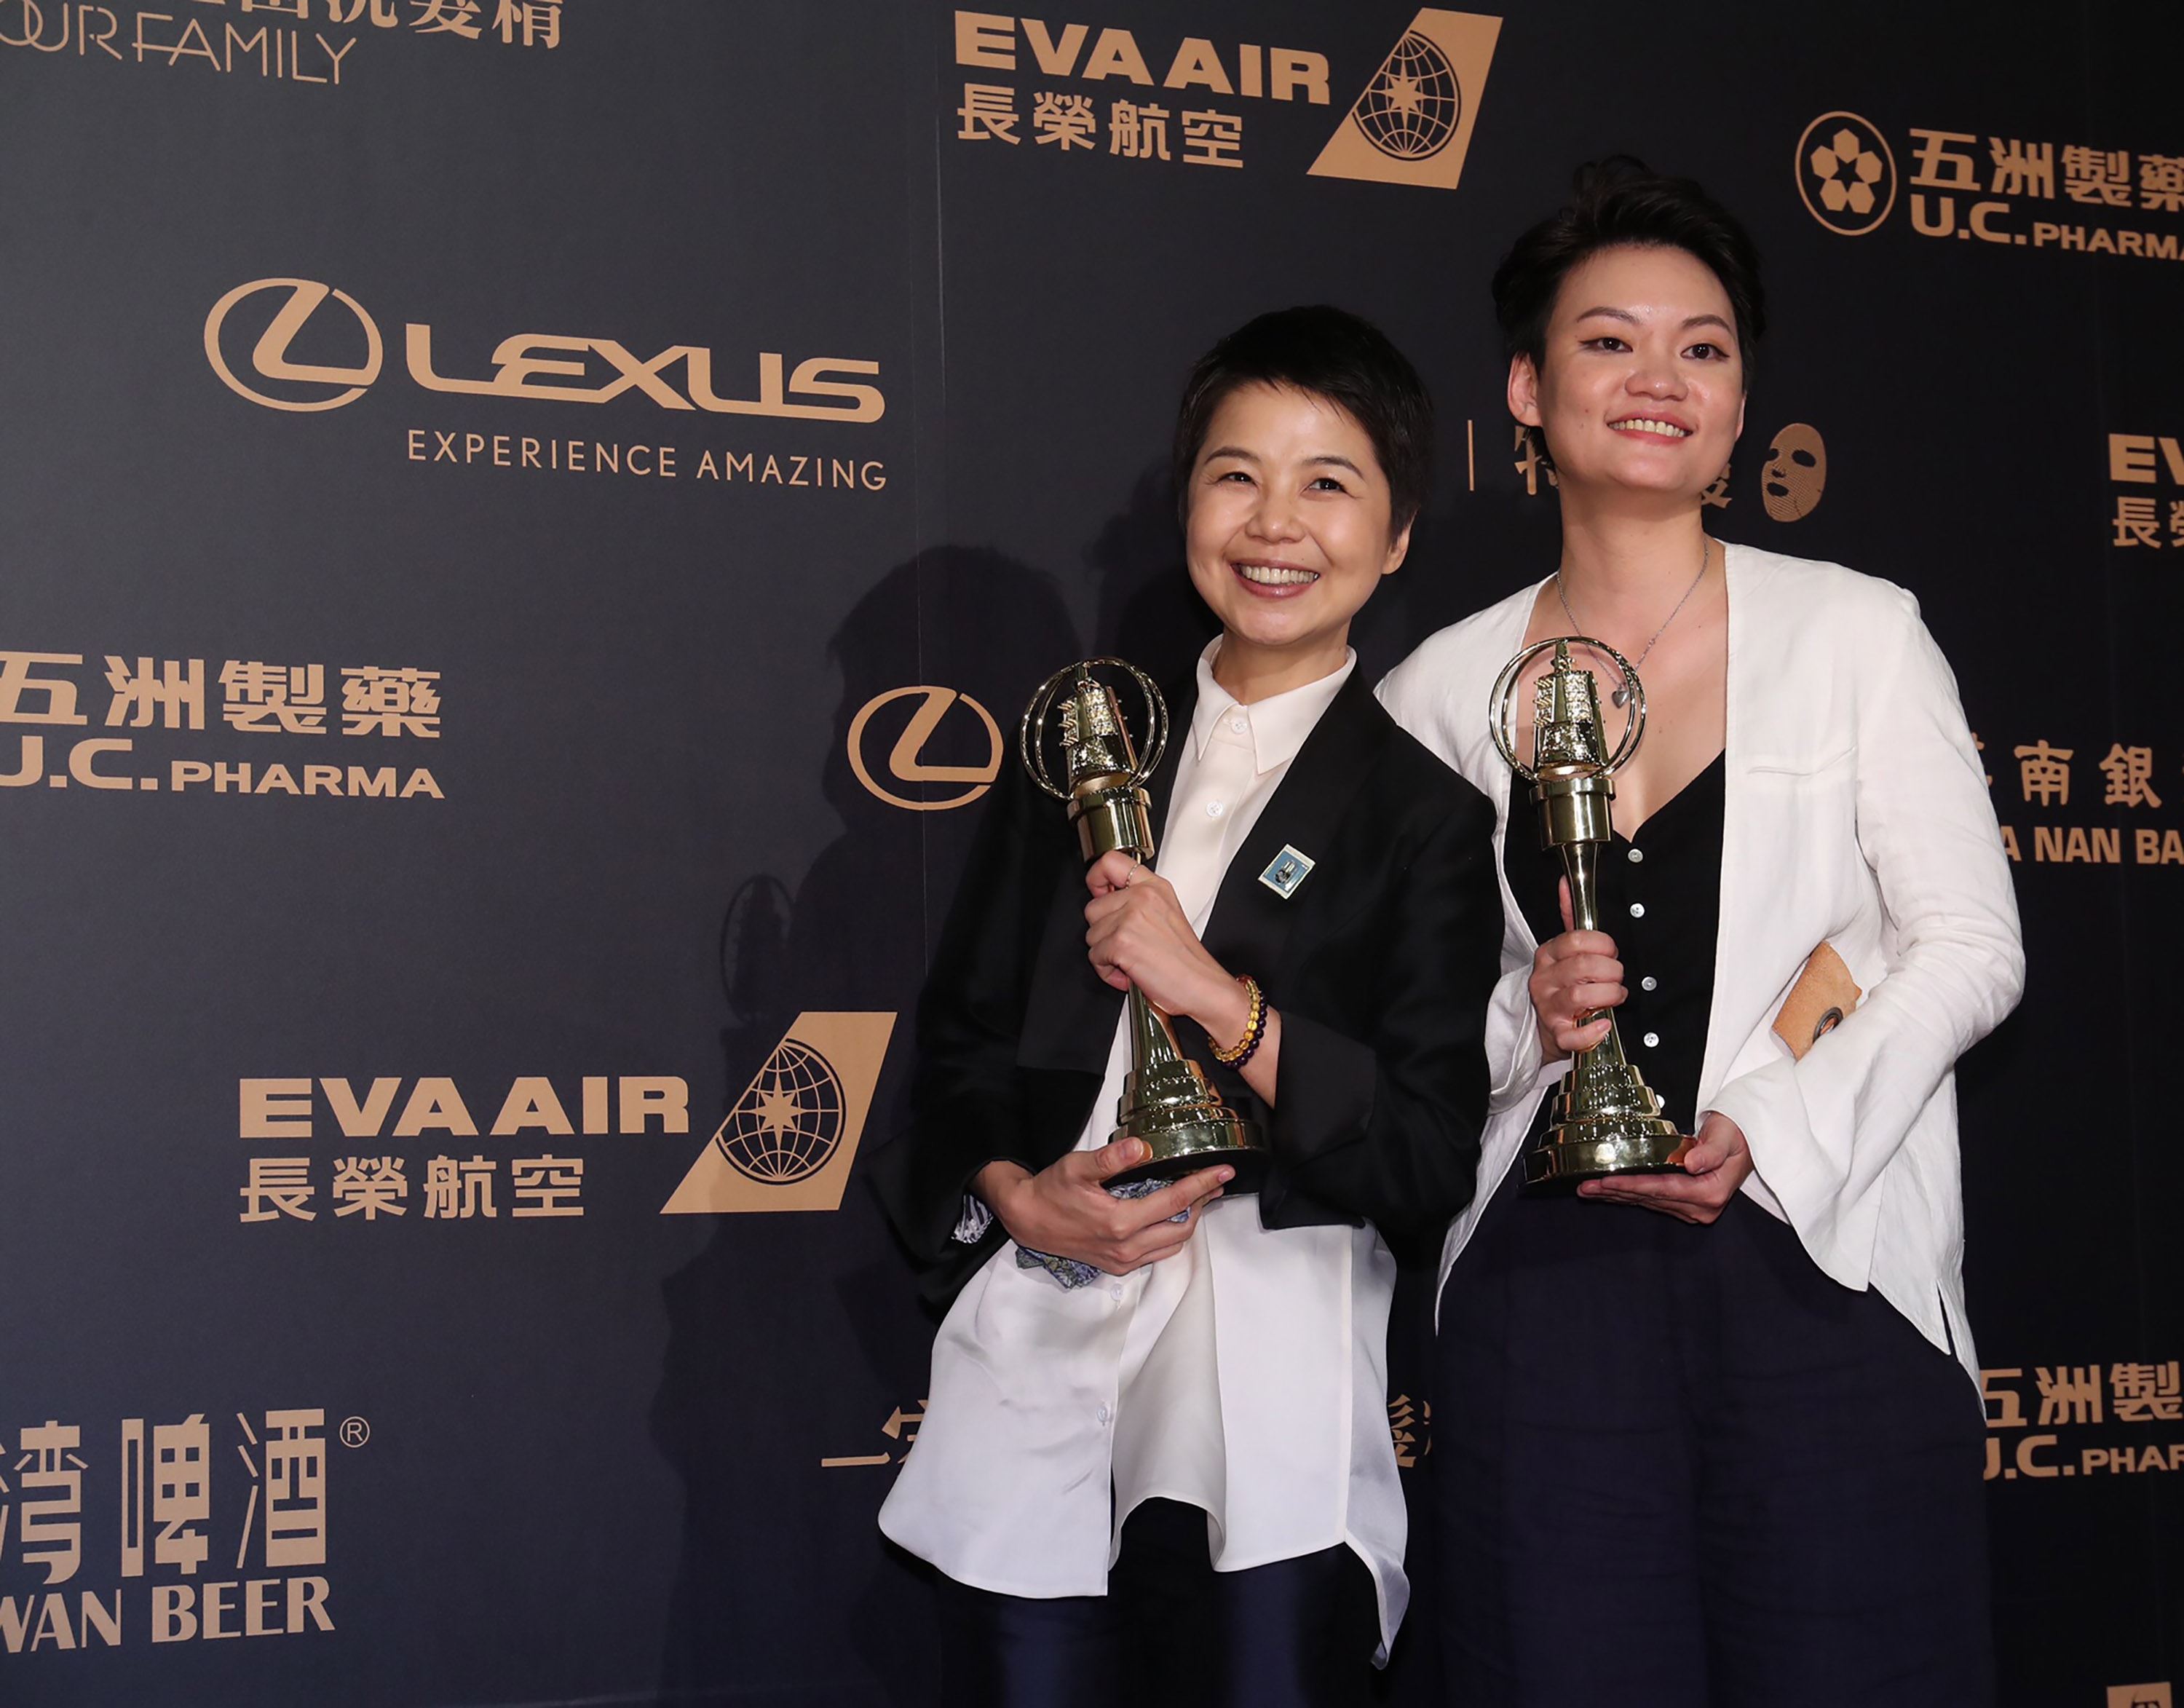 Director Chen Wei-ling (left) at an award ceremony.